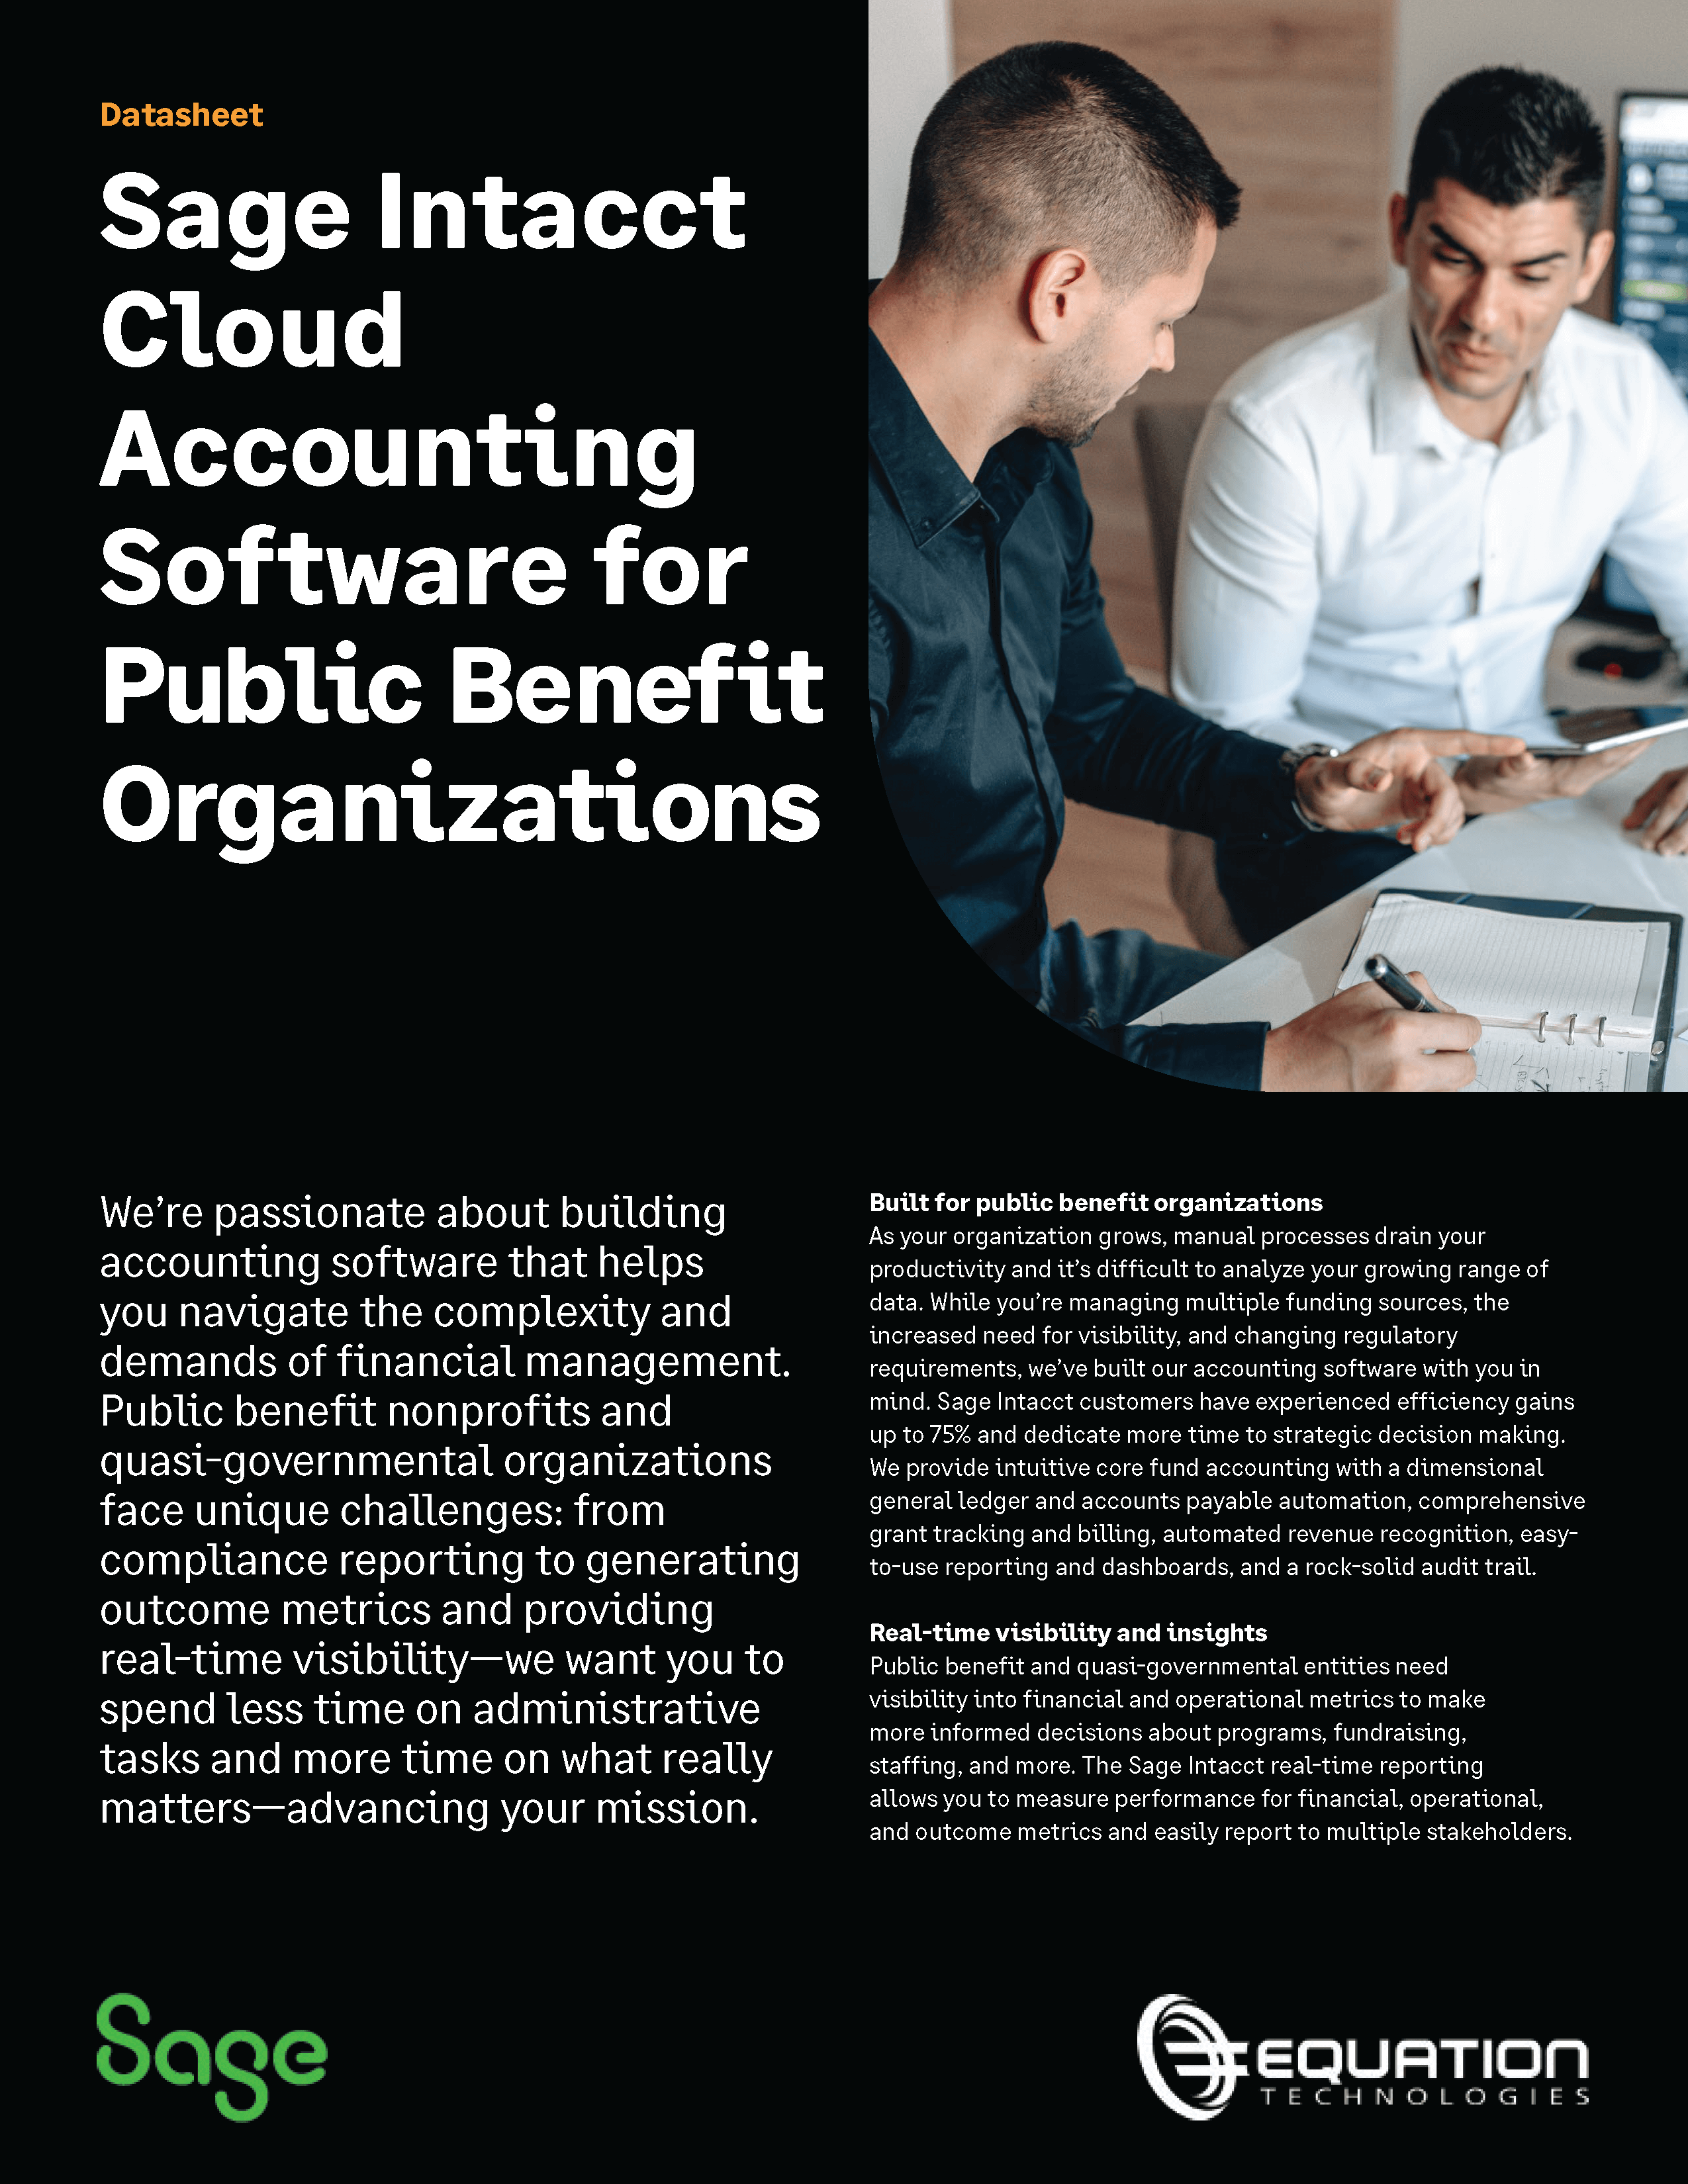 New Front Page - Cloud Accounting Software for Public Benefit Nonprofit Organizations_rebranded_Page_1-1